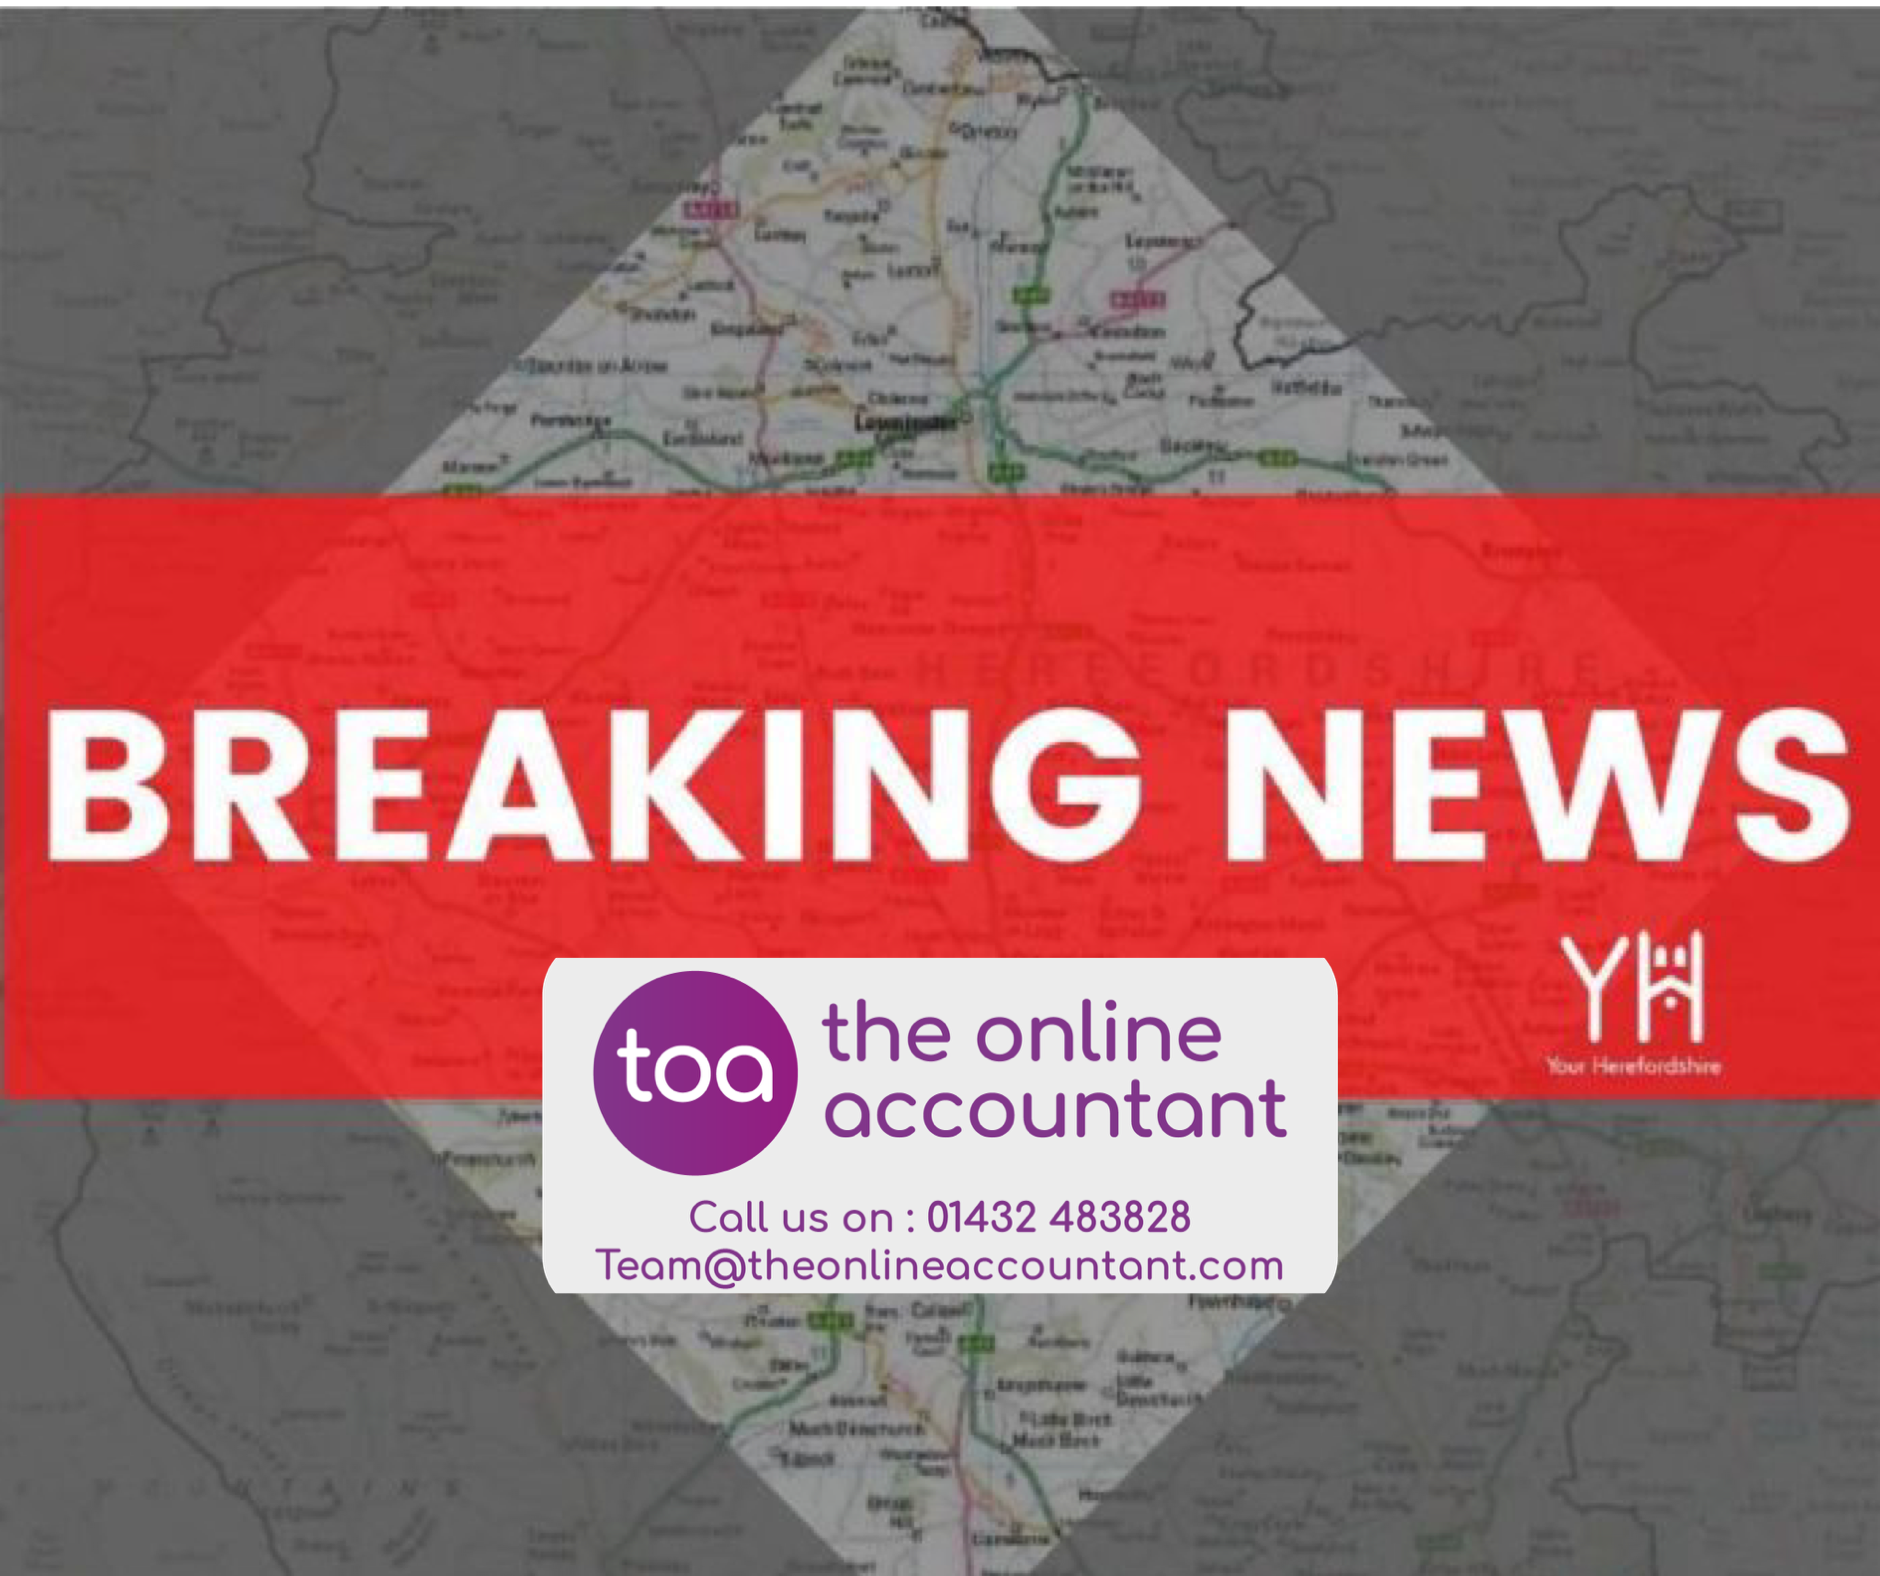 BREAKING | Huge jump in new COVID-19 cases in Herefordshire with 81 recorded today